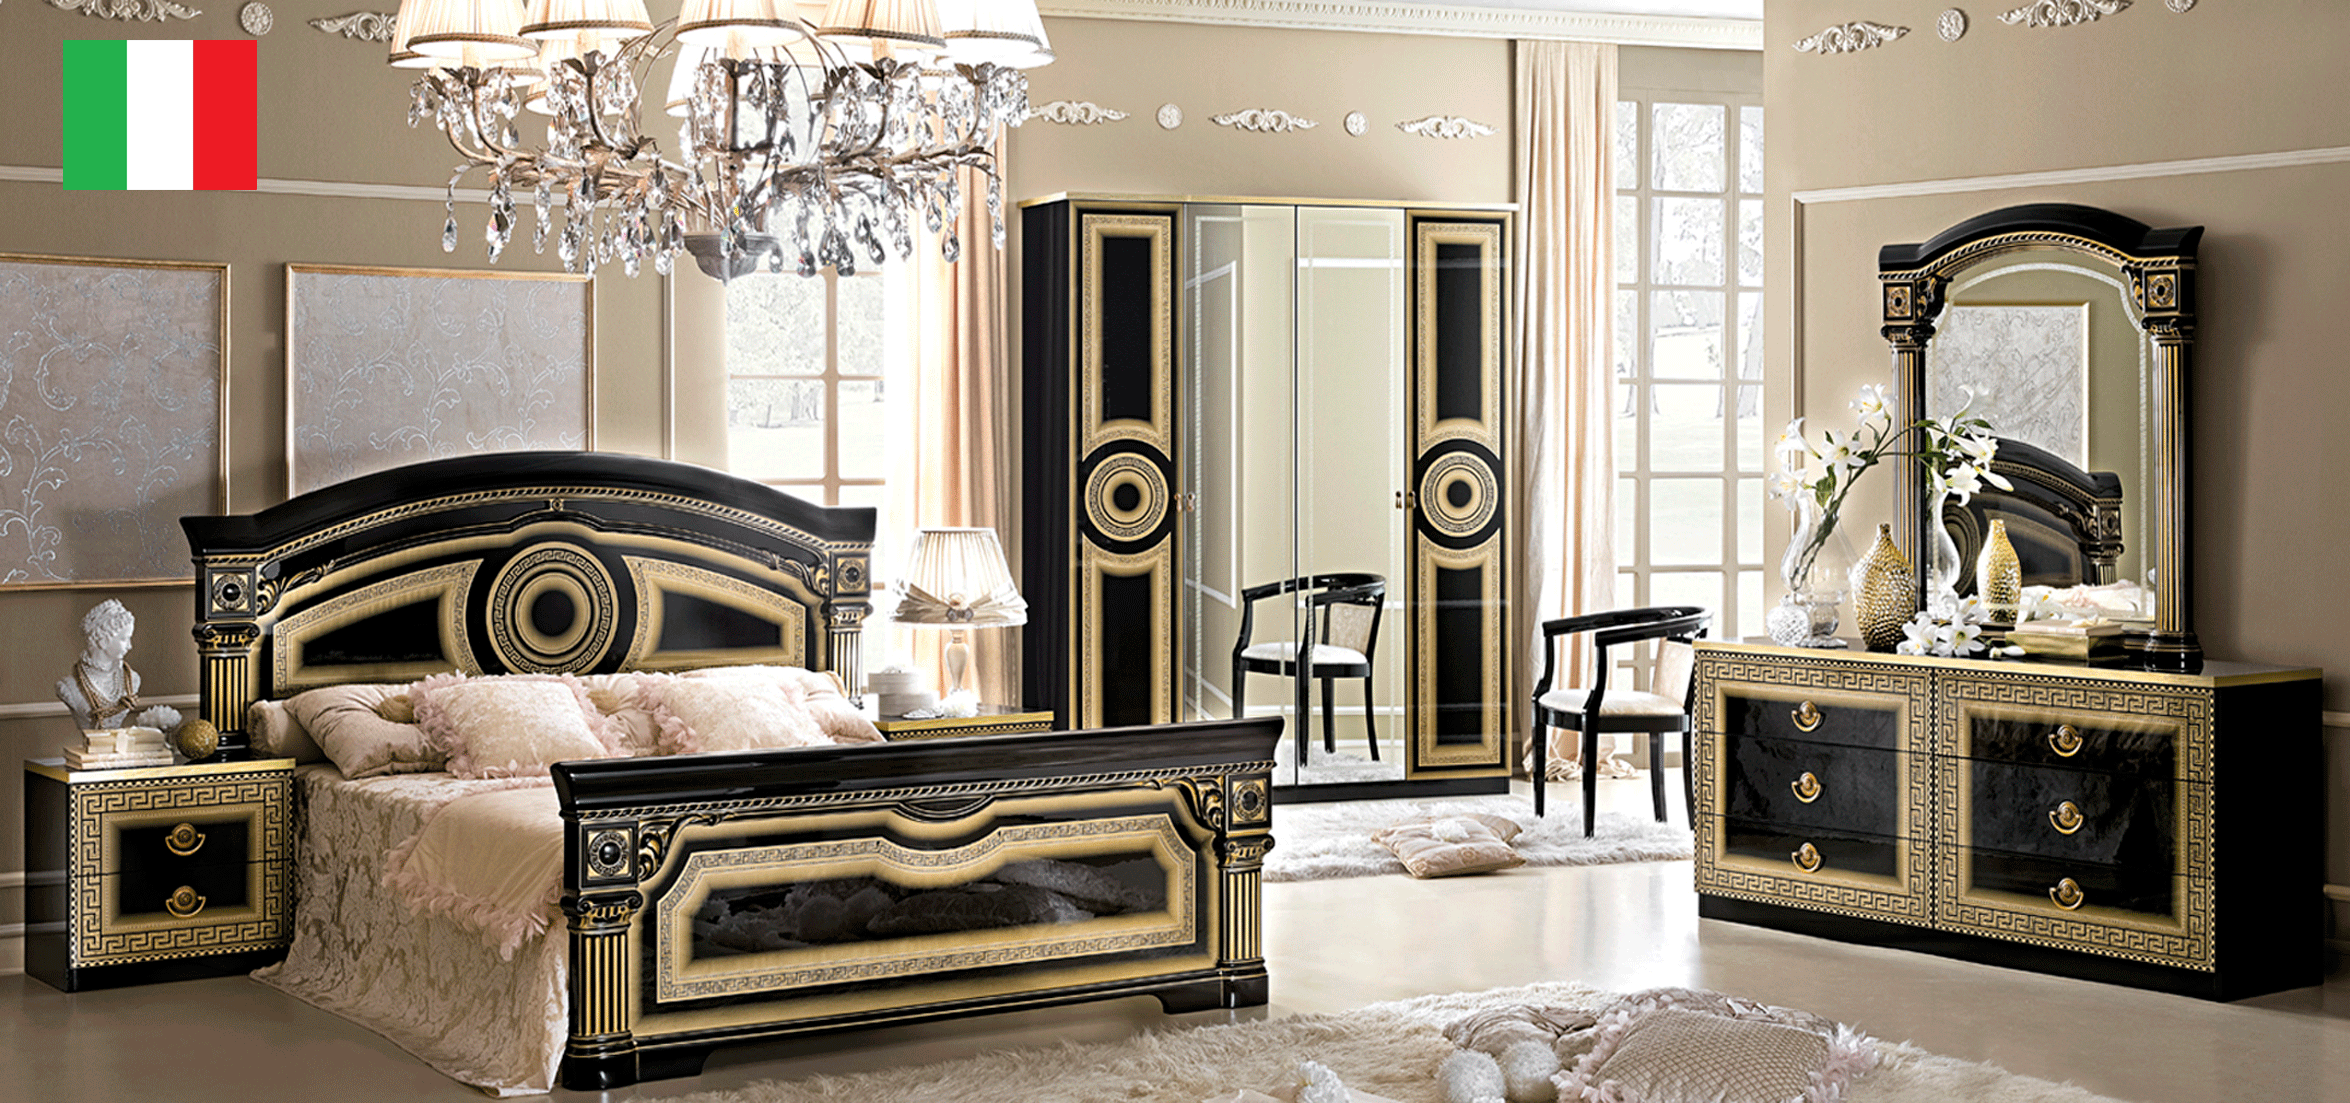 Bedroom Furniture Dressers and Chests Aida Bedroom Black w/Gold, Camelgroup Italy